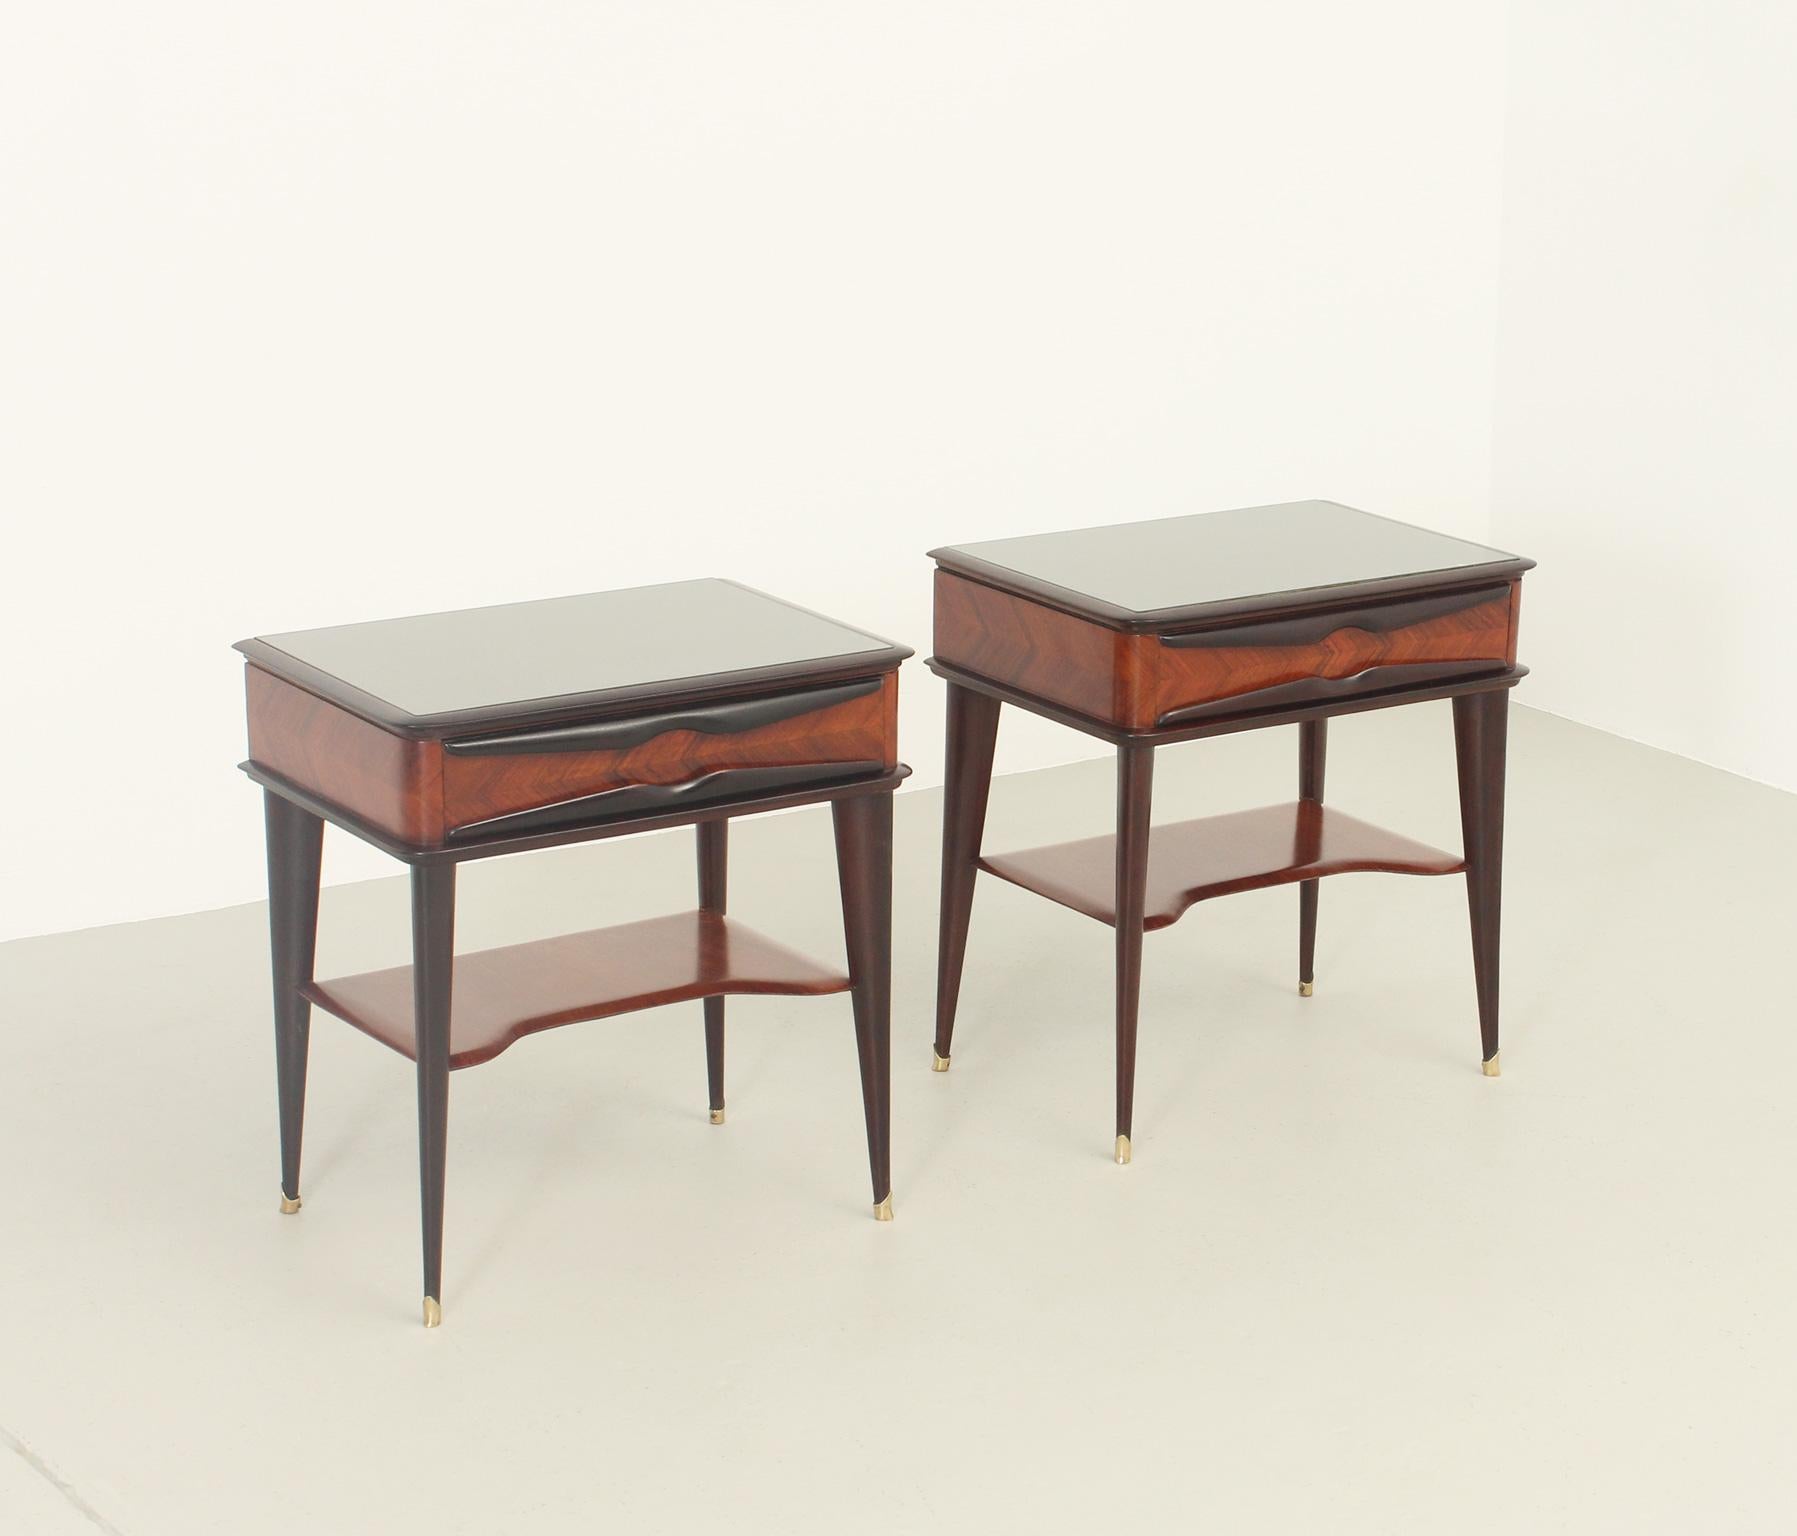 Pair of nightstands designed in 1950's by Vittorio Dassi for Dassi Mobili, Italy. Hardwood and mahogany wood with original top in colored glass and the characteristics brass feet of Dassi.